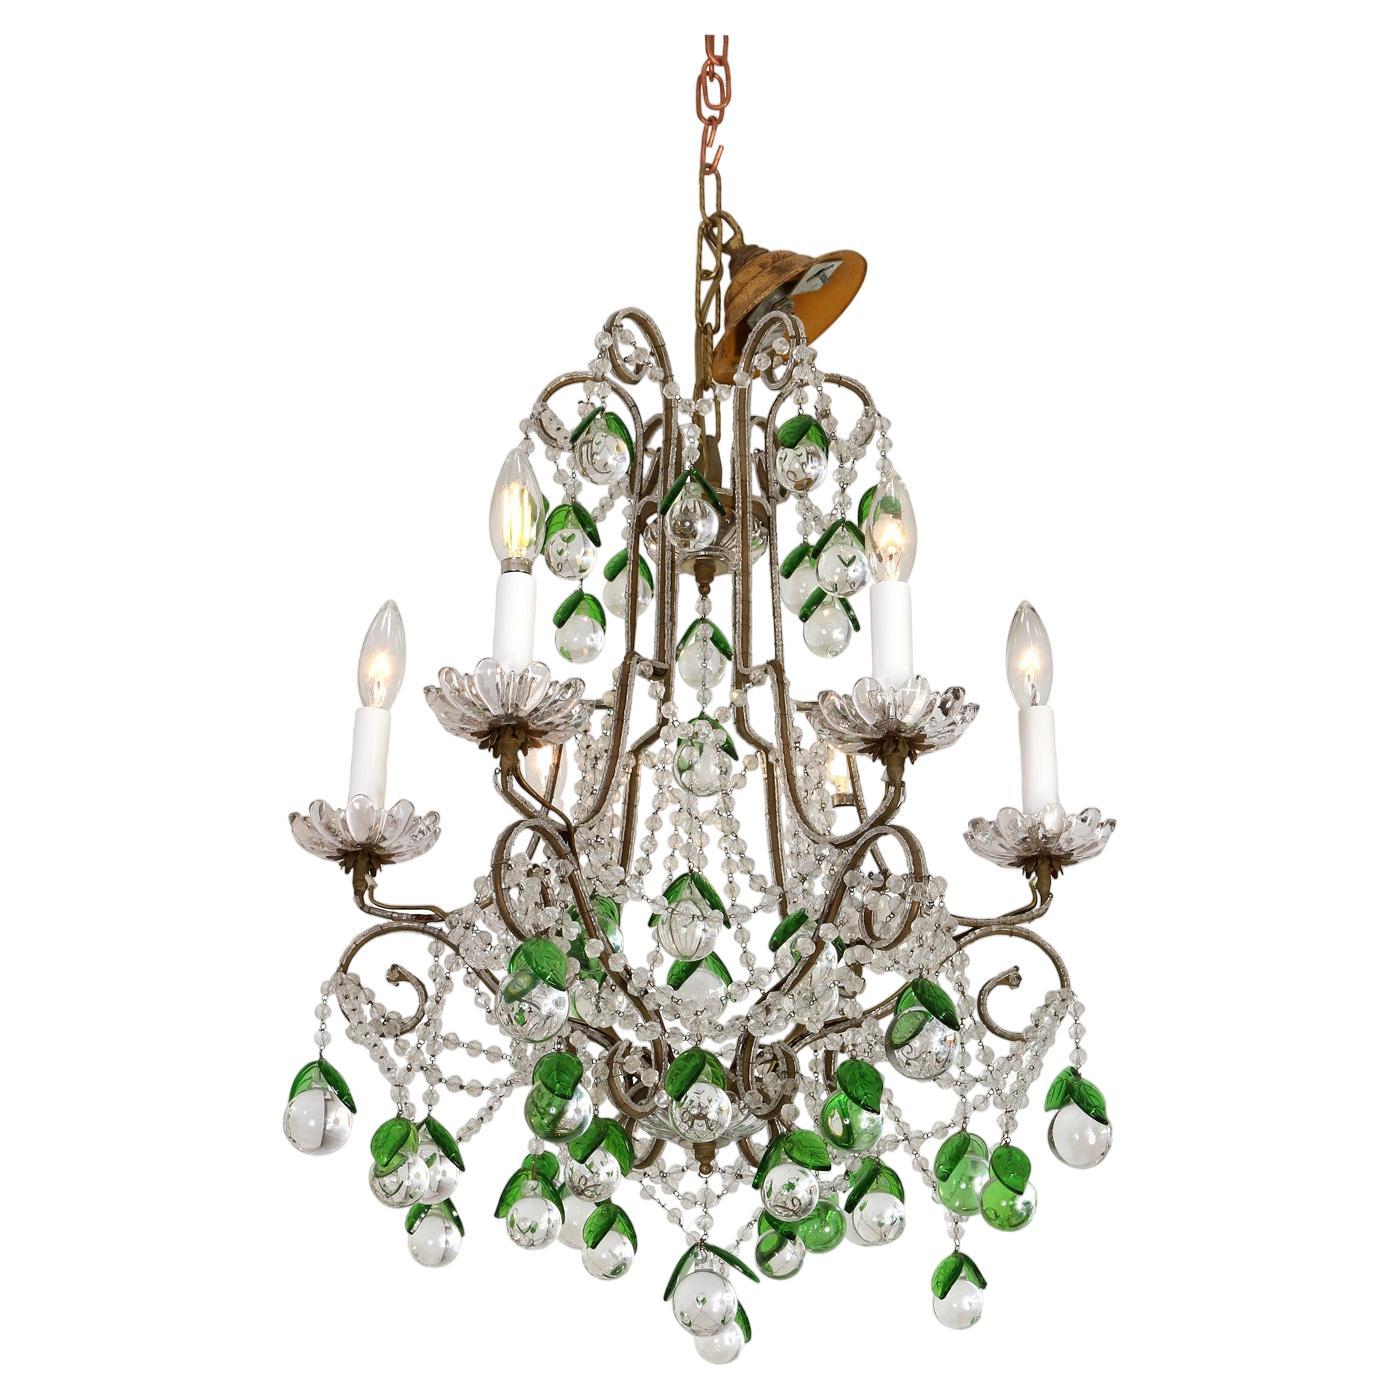 A Six-Arm Crystal and Iron Chandelier For Sale